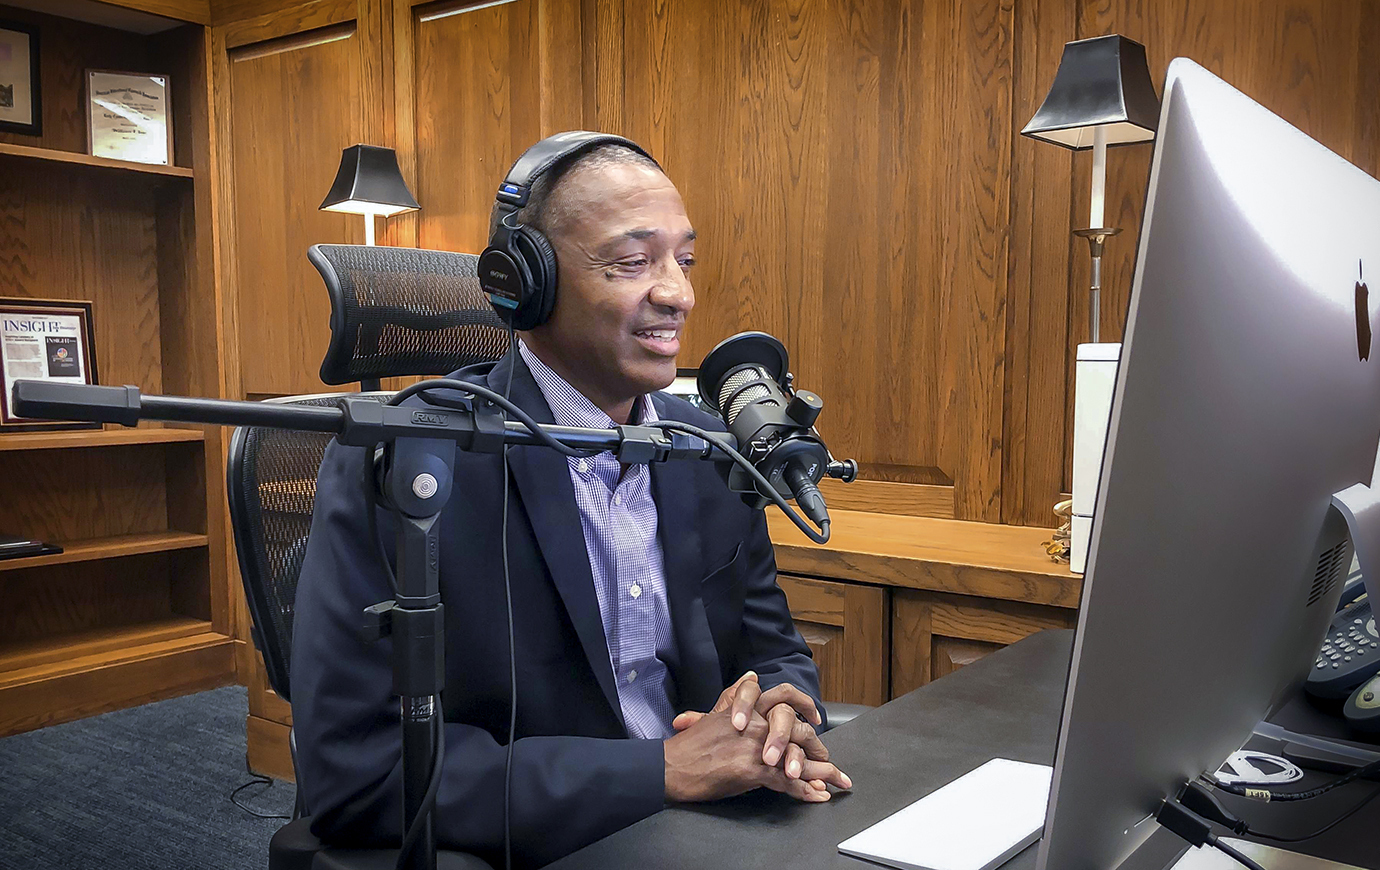 President Tate recording episode of podcast.